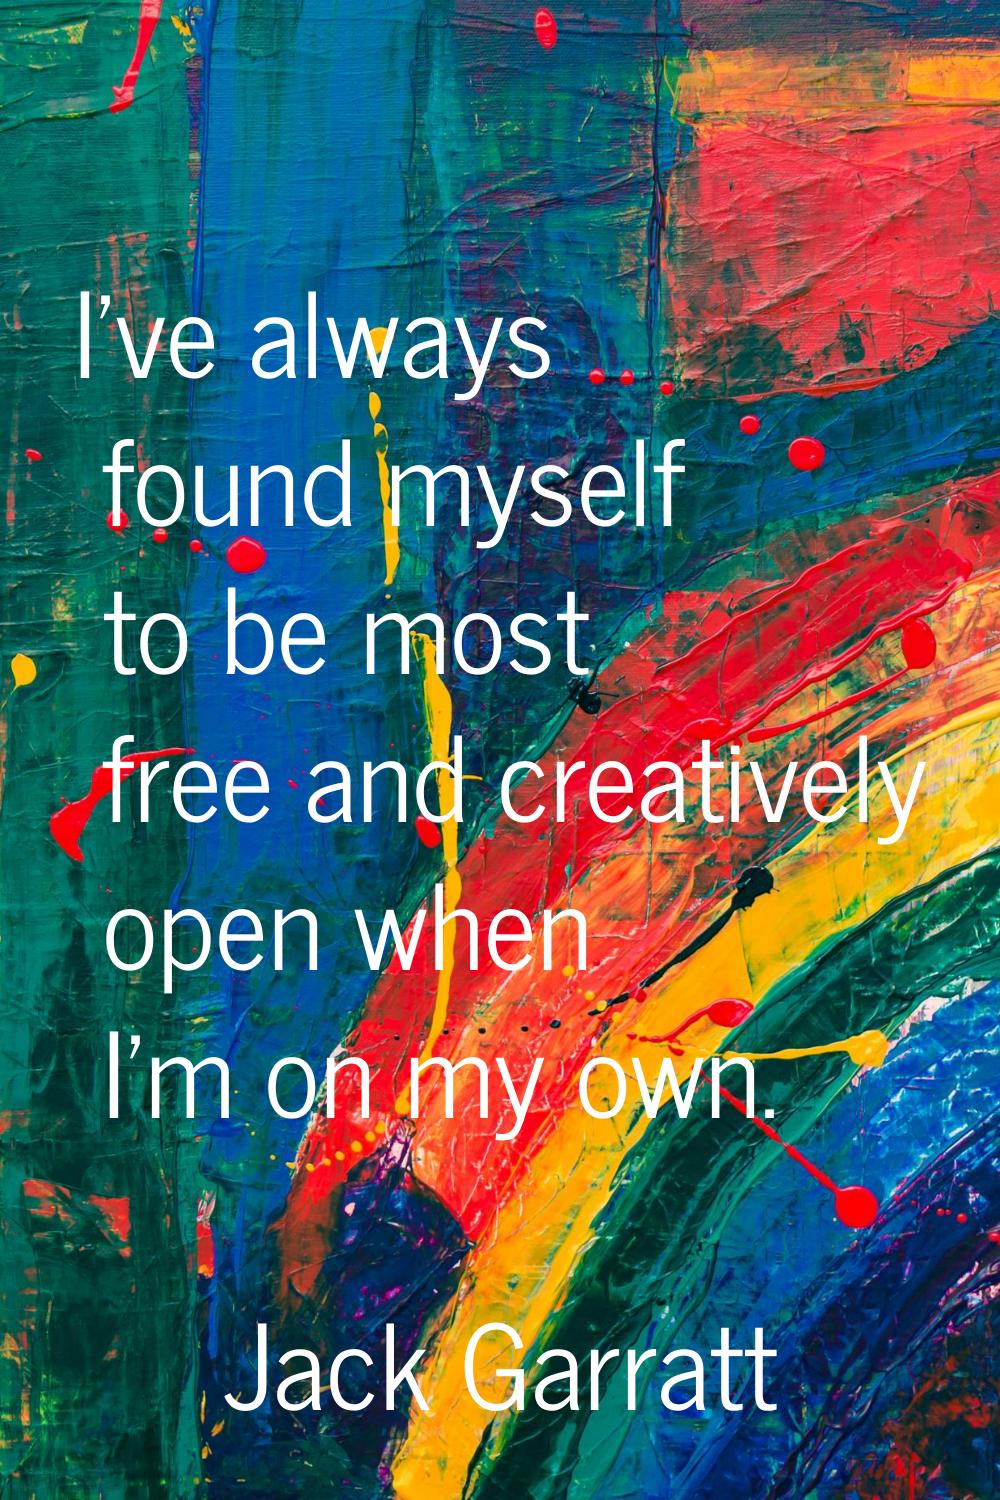 I've always found myself to be most free and creatively open when I'm on my own.